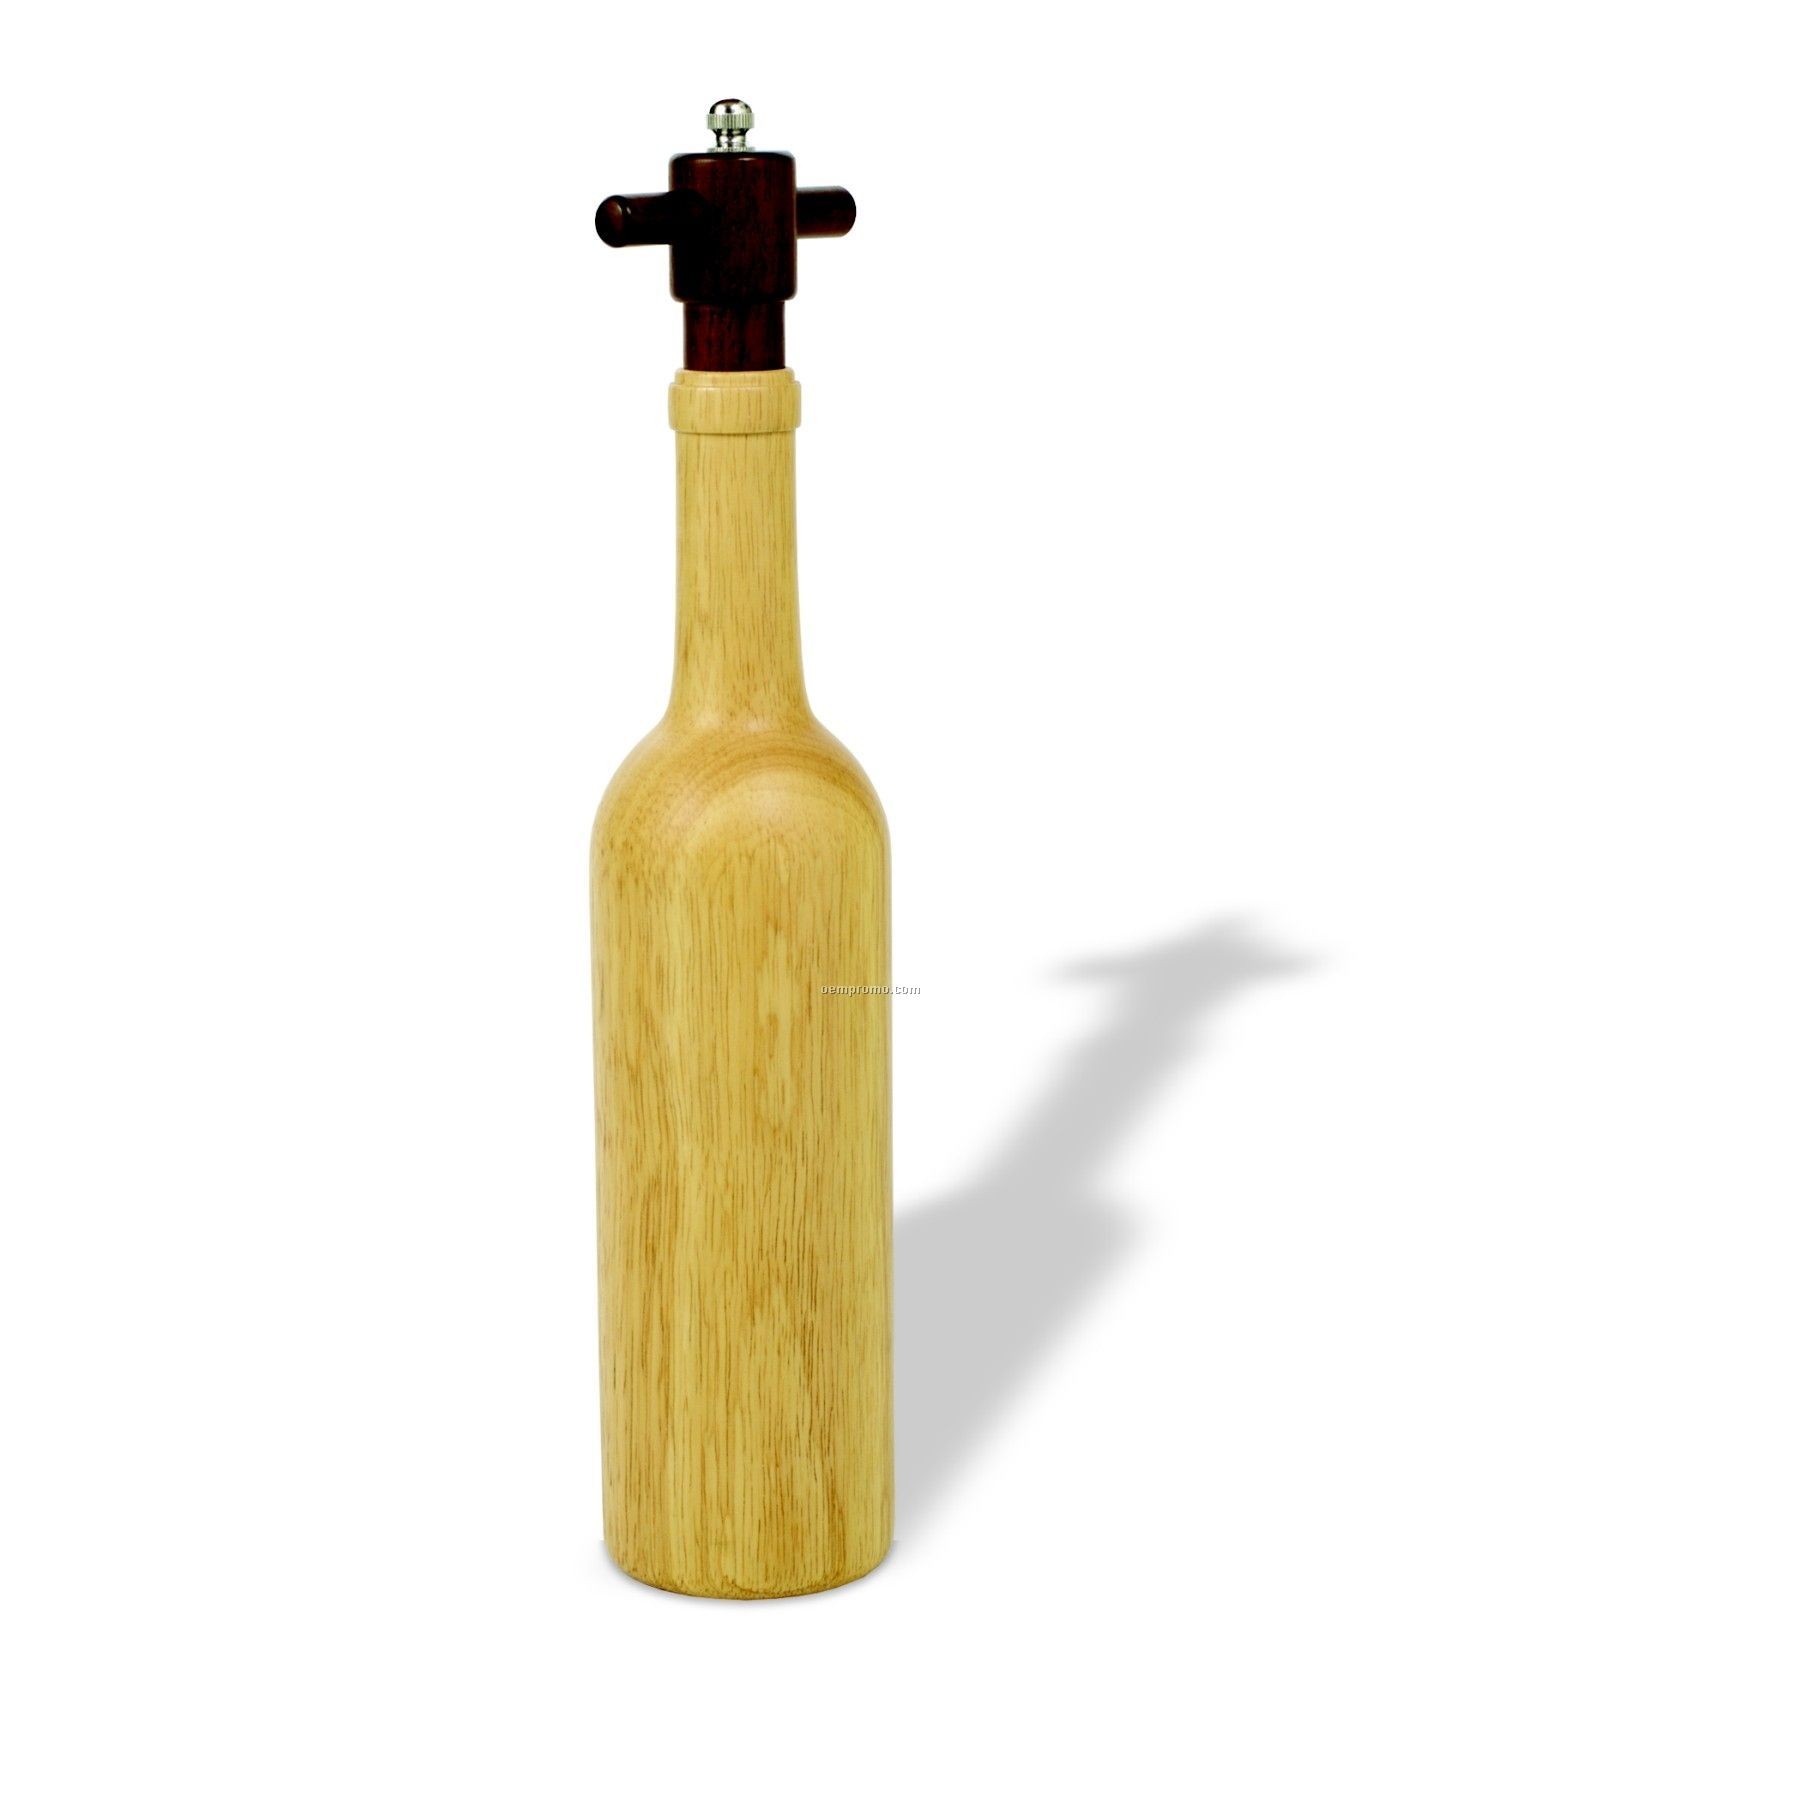 Vintage Peppermill- Laser Personalization